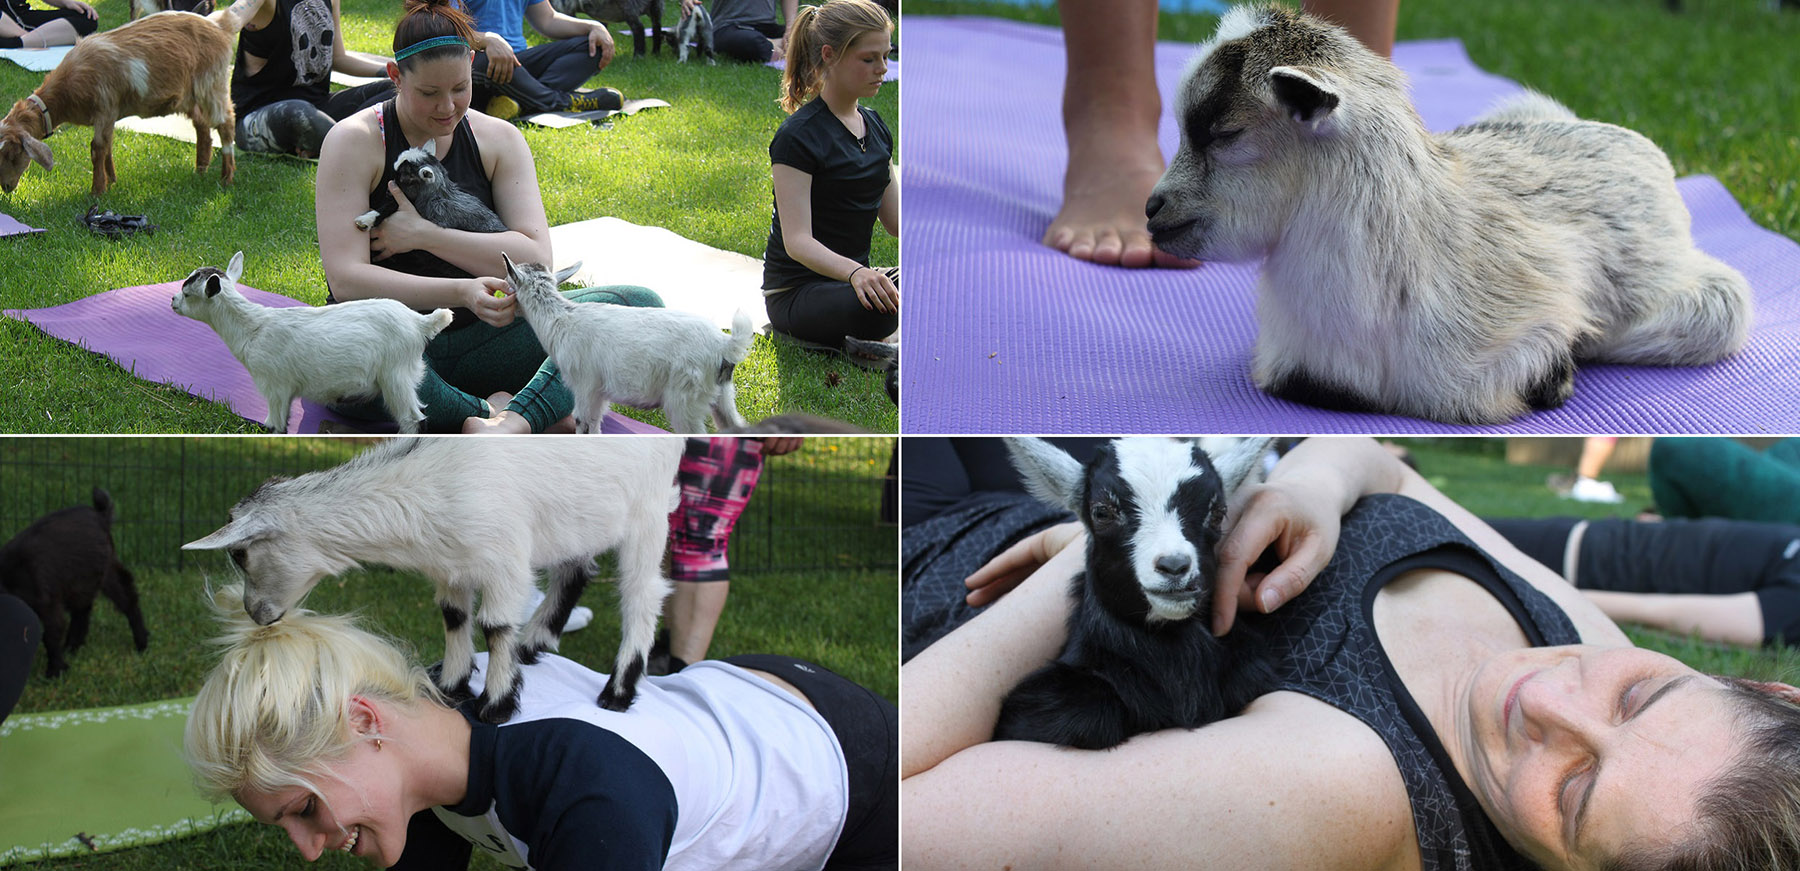 montage of images from goat yoga class at Black Creek Pioneer Village